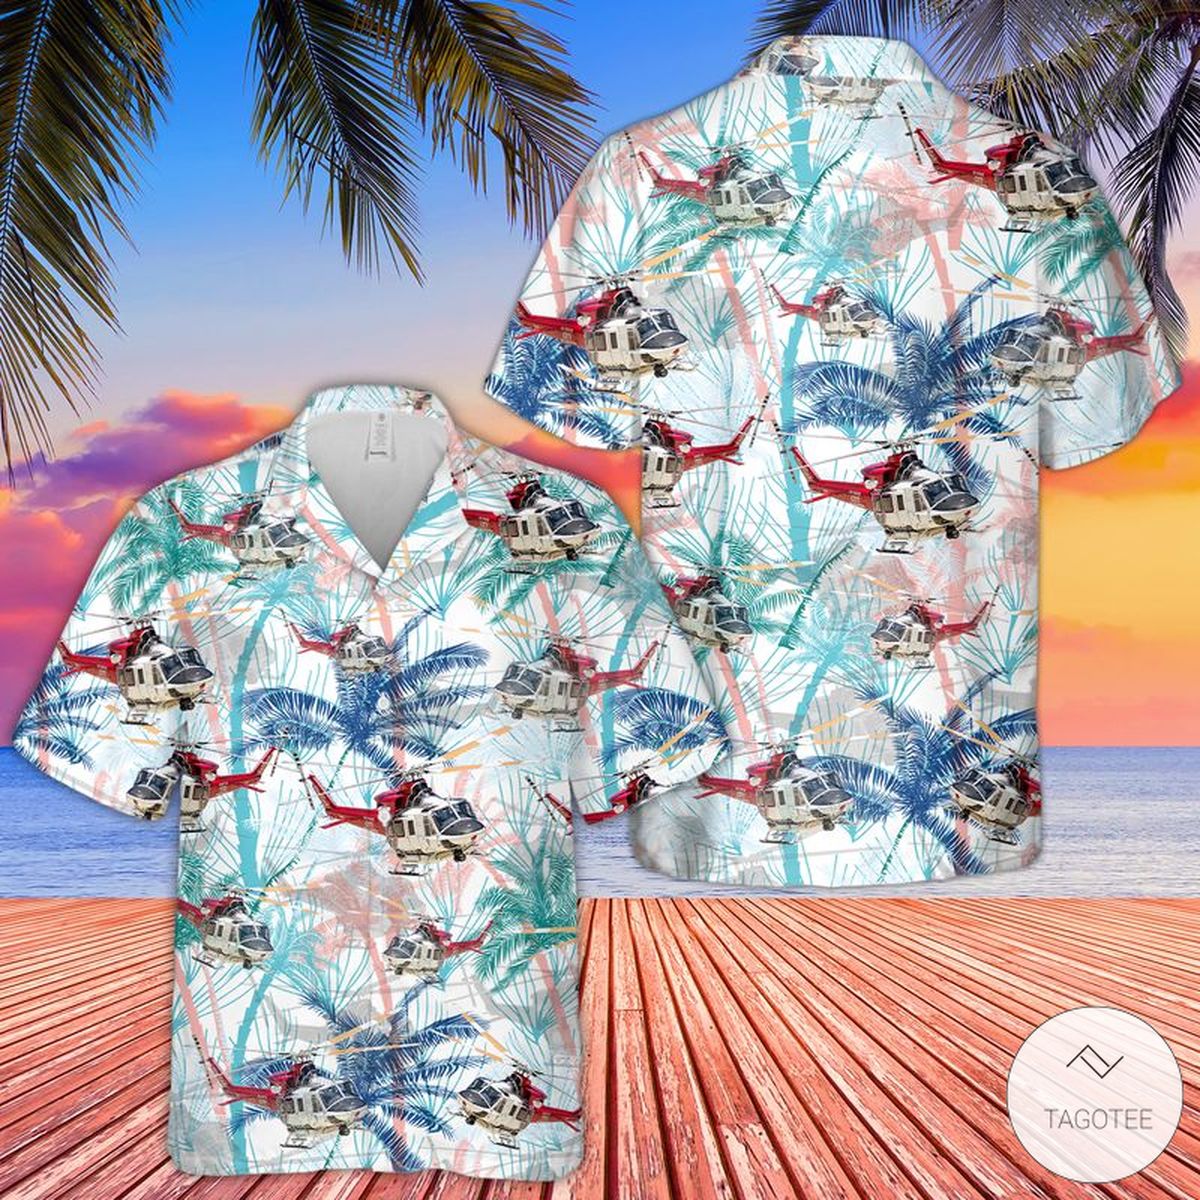 Bell 412EP of the Los Angeles City Fire Department Hawaiian Shirt